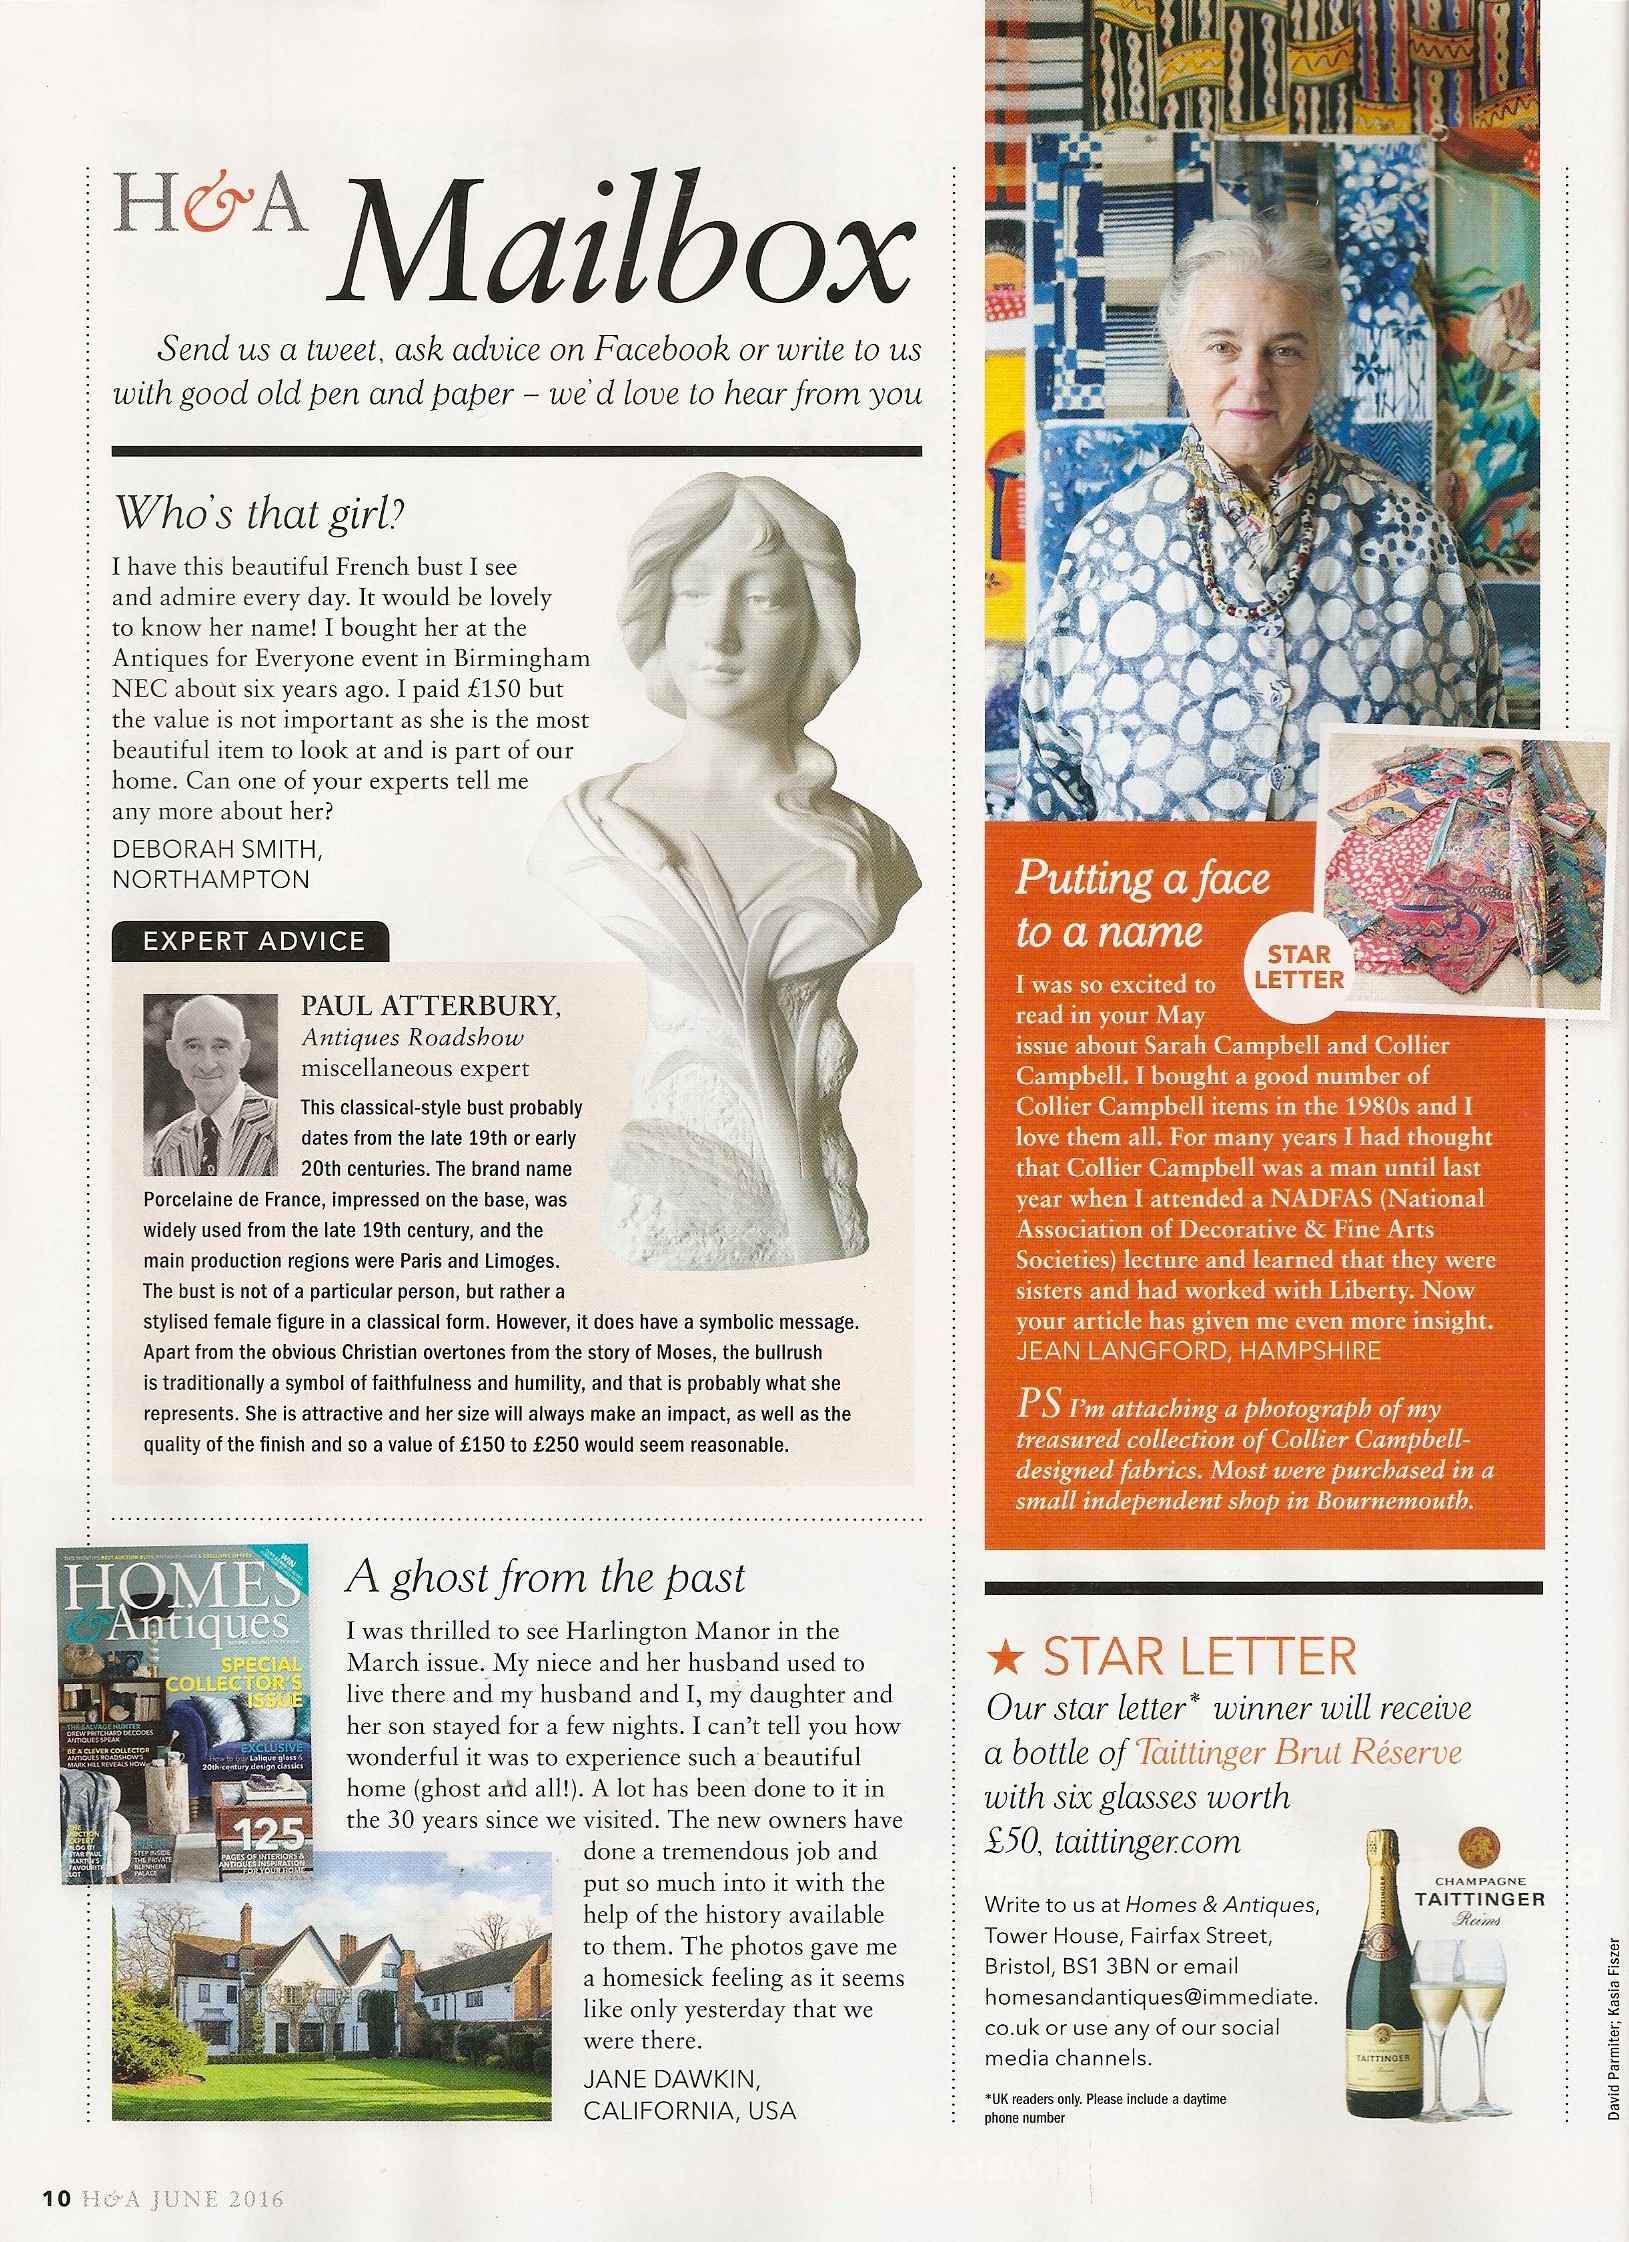 Homes & Antiques, page 10, June 2016